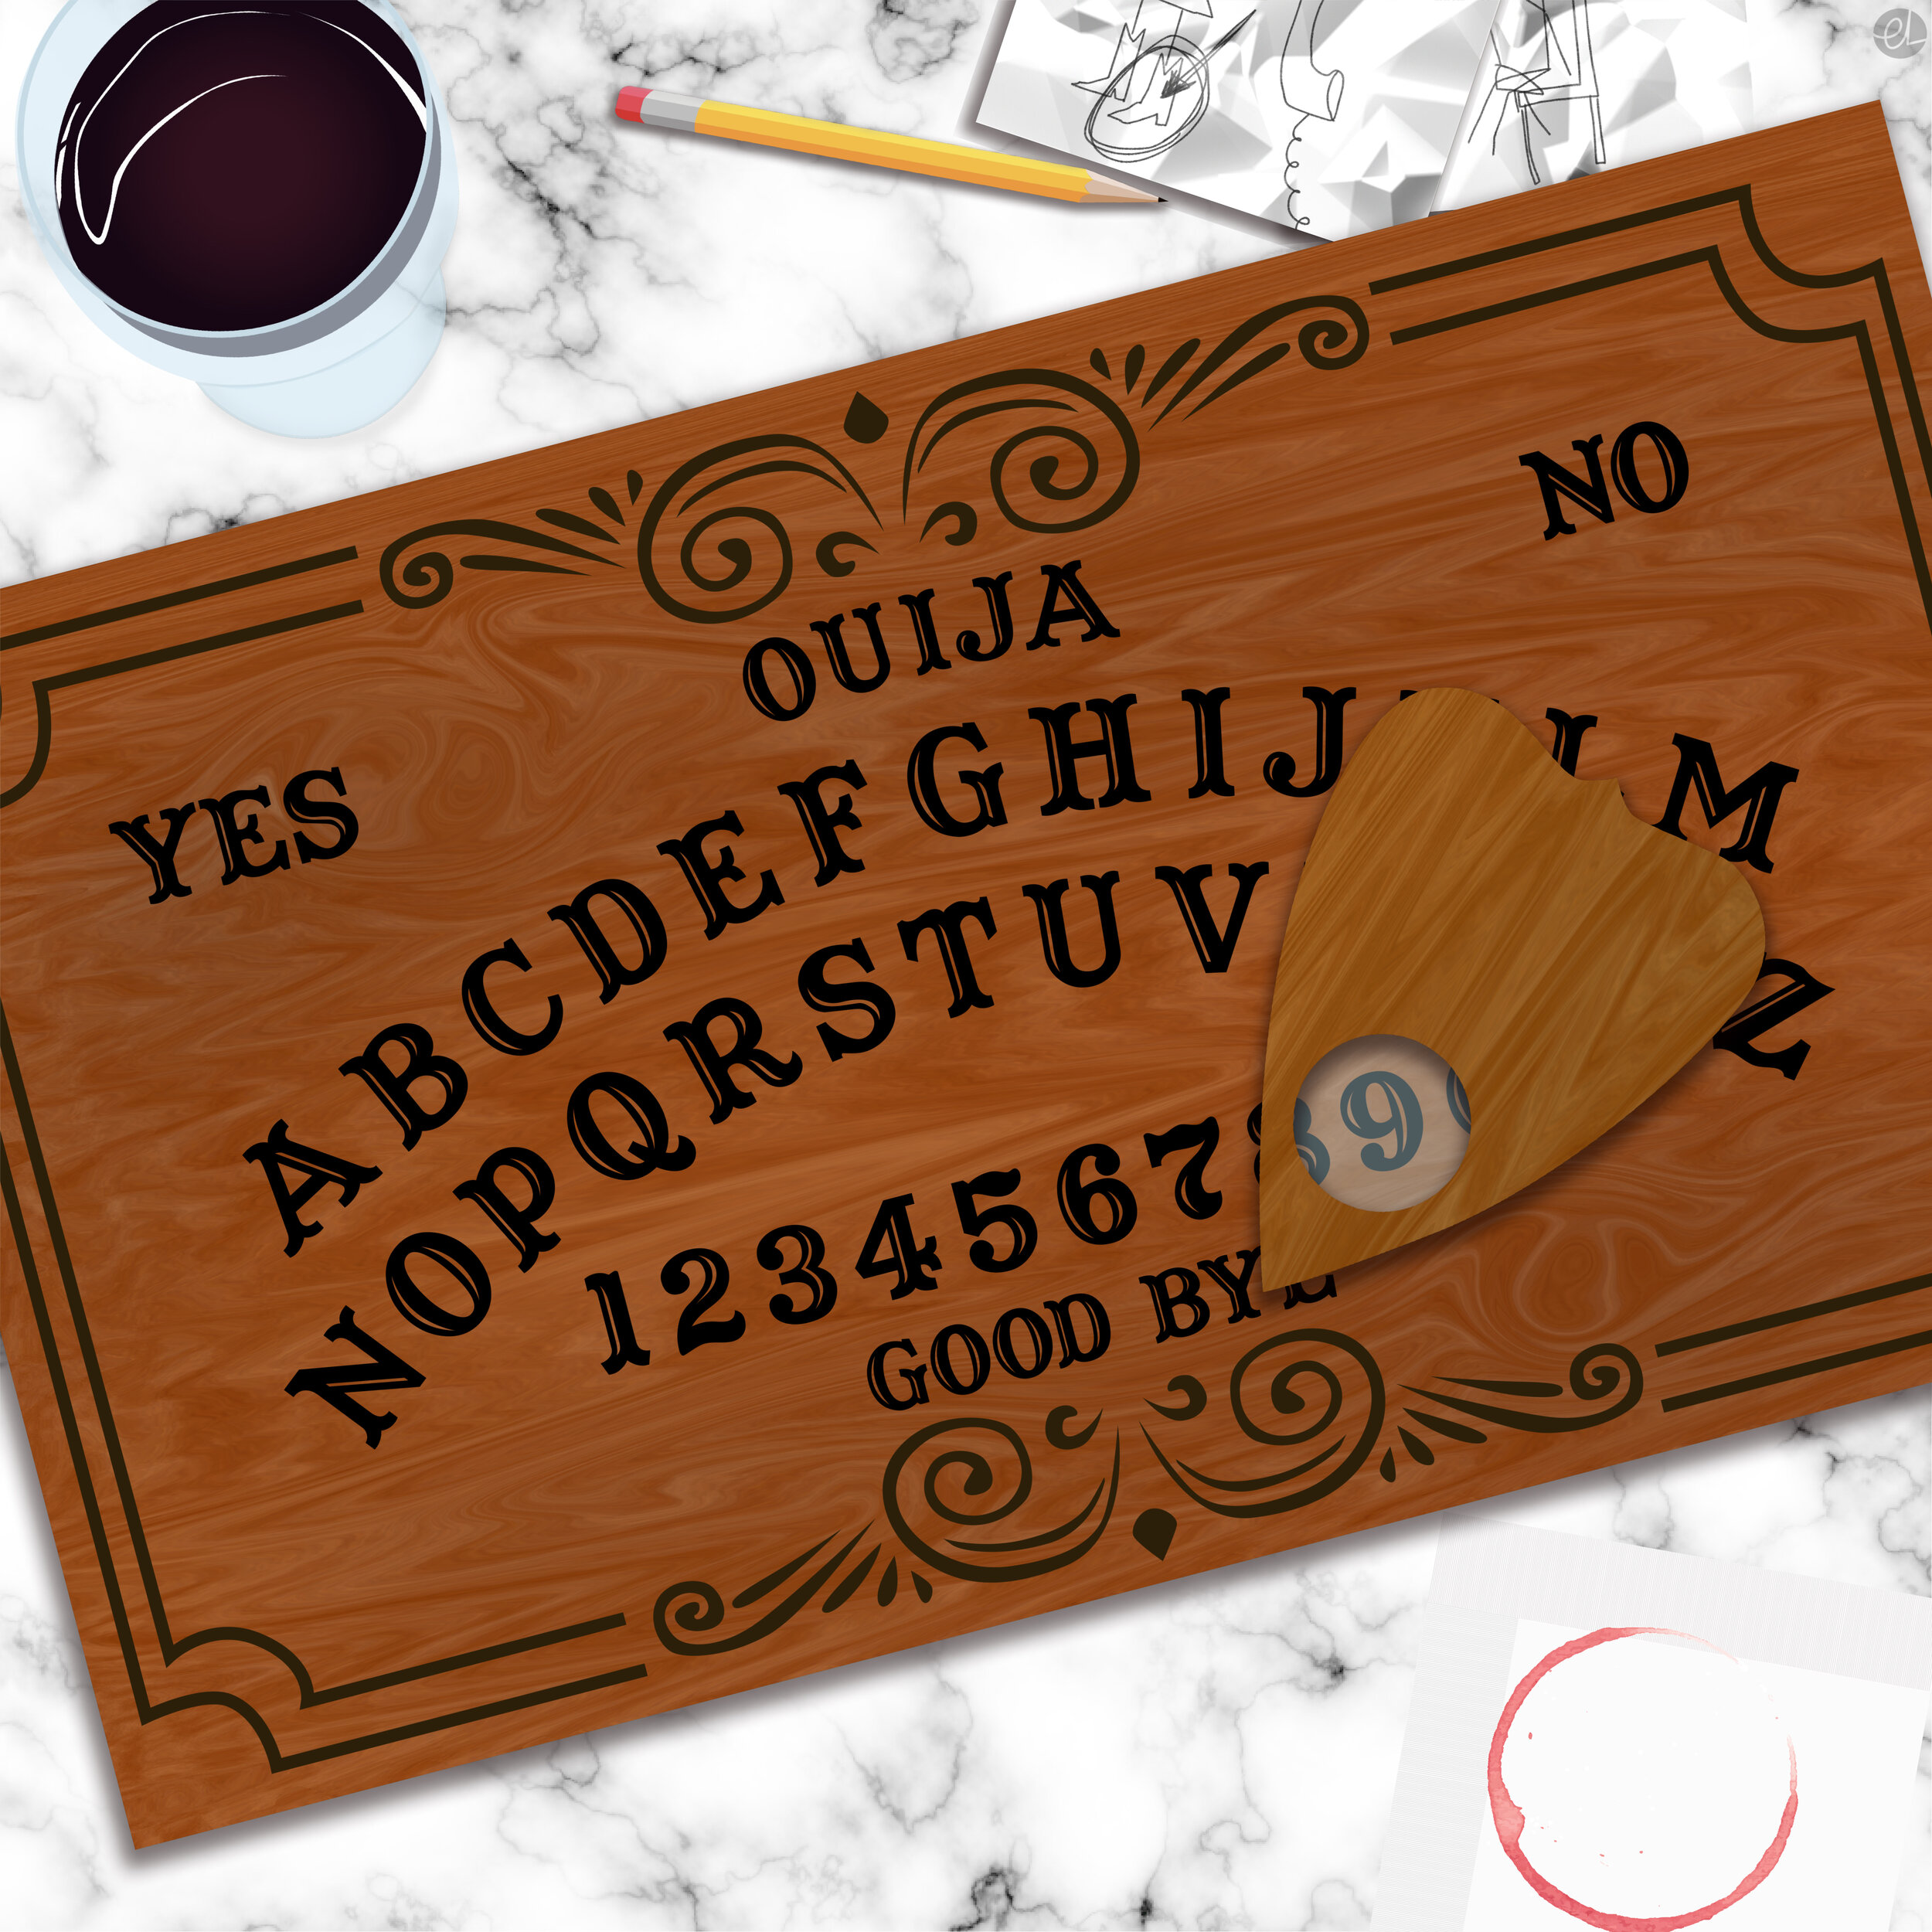 Week 03, Ghosts in the Burbs, Episode 2: Ouija? I Hardly Know Ya?